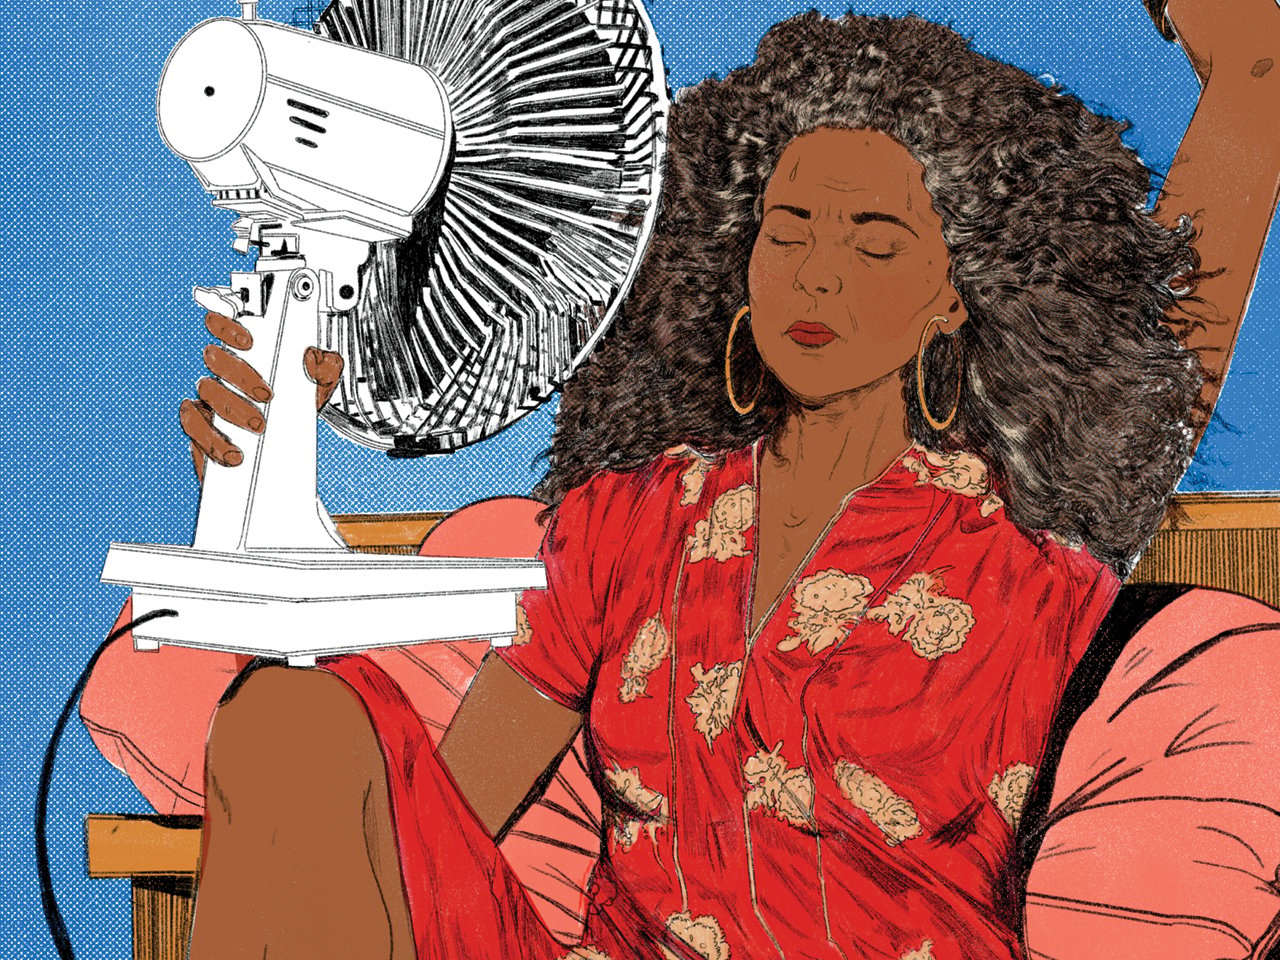 An illustration of a woman, wearing a red jumpsuit and hoop earrings, holding a tabletop fan propped up on her knee as she experiences a hot flash